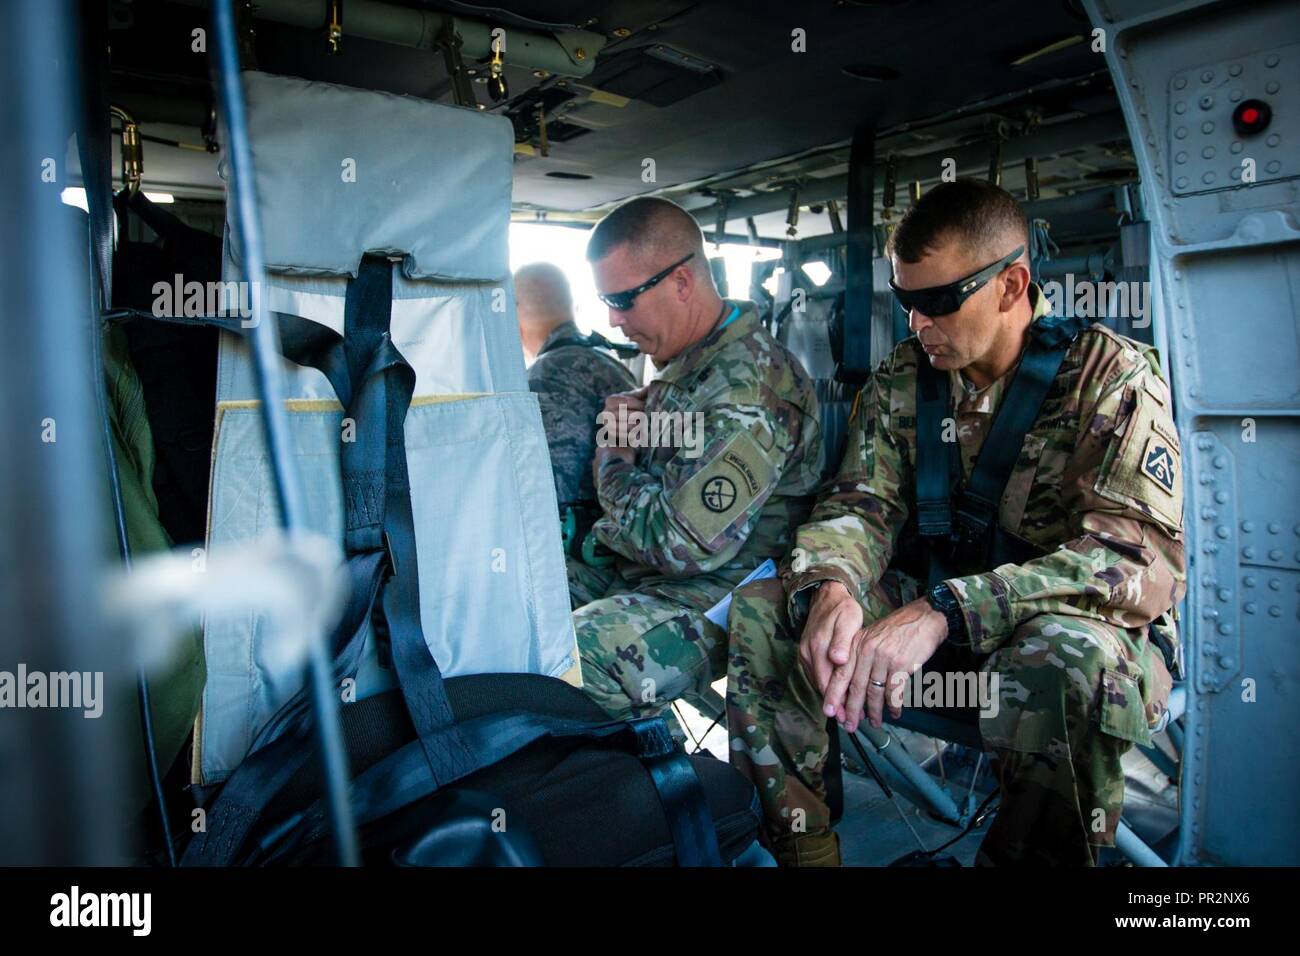 Lt. Gen. Jeffrey S. Buchanan (right), commander of U.S. Army North (Fifth Army), and Maj. Gen. James A. Hoyer (left), the adjutant general of the West Virginia National Guard, prepare for a ride in a UH-60 Black Hawk Helicopter to review the 2017 National Jamboree at the Summit Bechtel Reserve near Glen Jean, W.Va., July 25, 2017. More than 30,000 scouts, troop leaders, volunteers and professional staff members, as well as more than 15,000 visitors are expected to attend the 2017 National Jamboree. Approximately 1,200 military members from the Department of Defense. U.S. Coast Guard and Nation Stock Photo